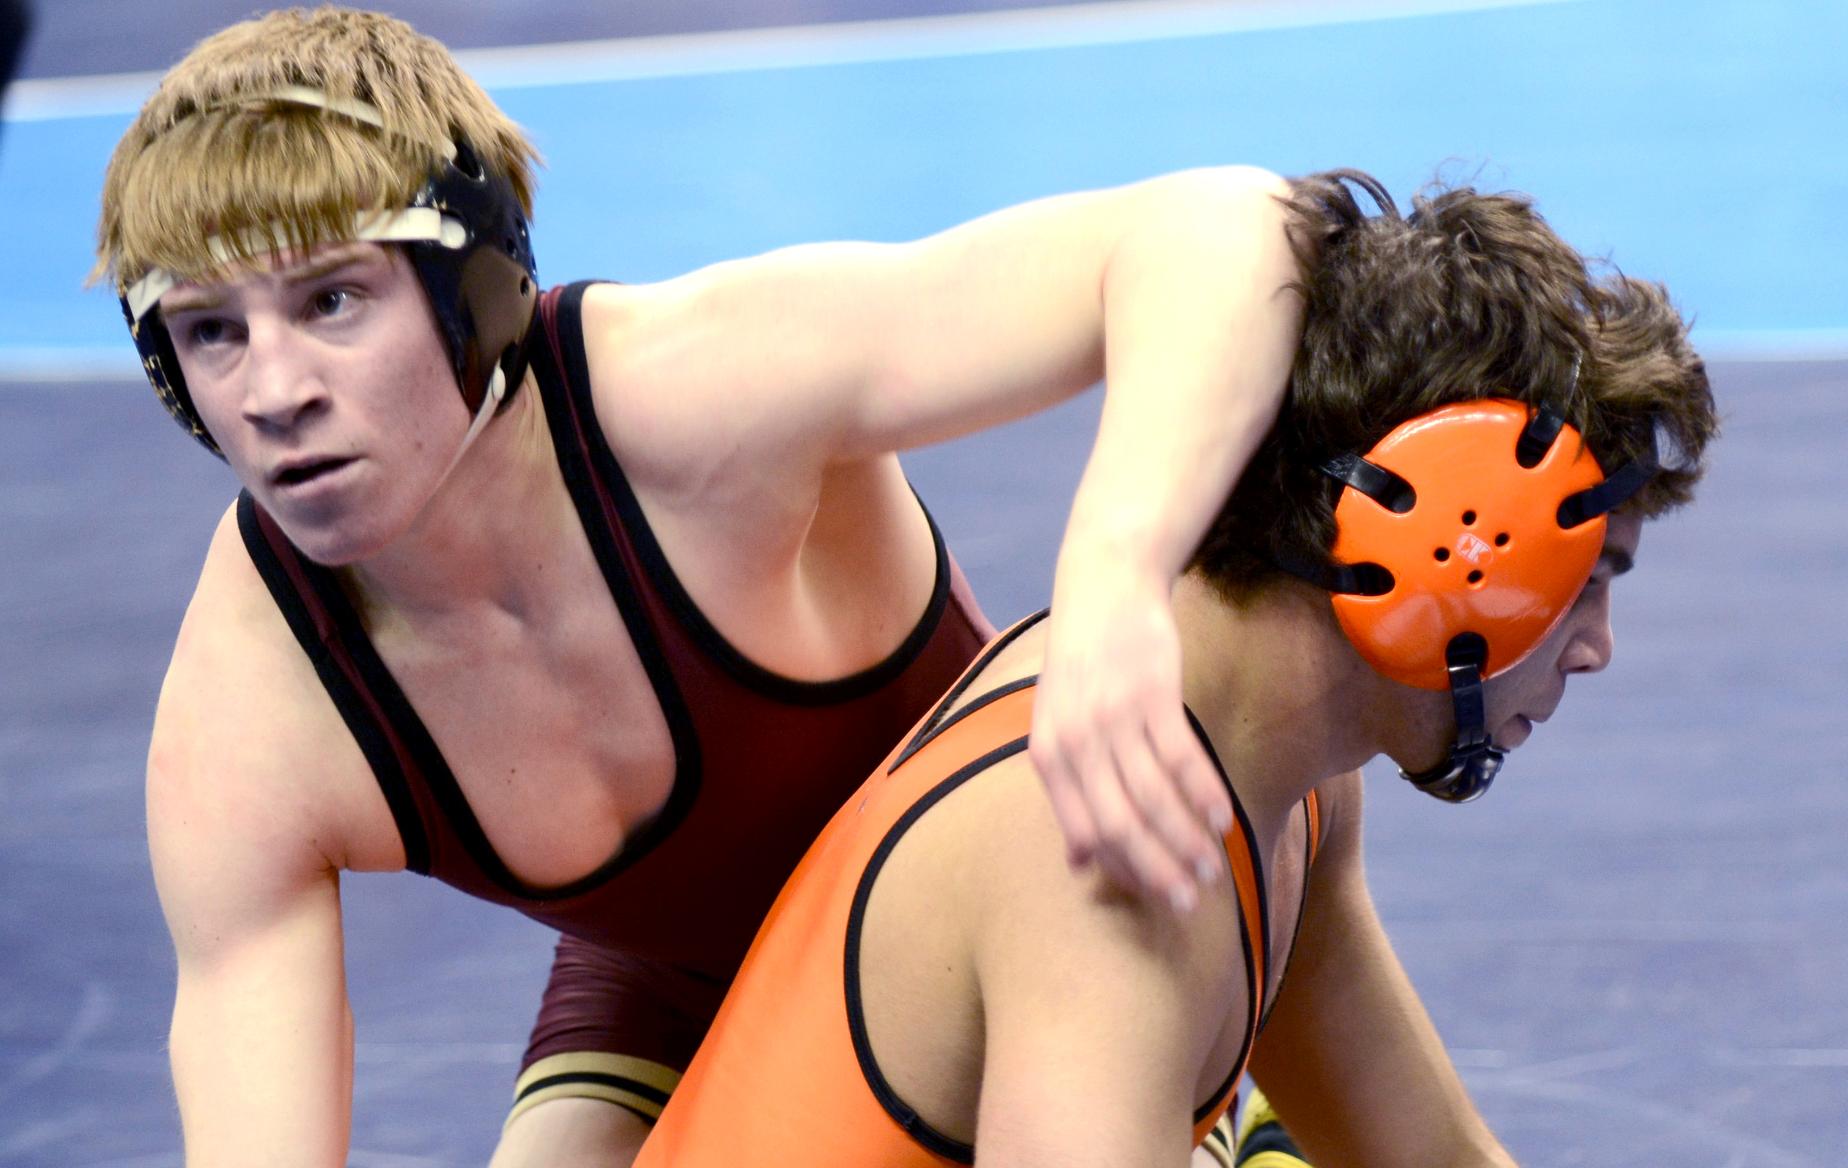 Senior Gabe Foltz, who is ranked eighth at 133,  went 4-0 at the National Duals meet and is now 18-7 on the season.